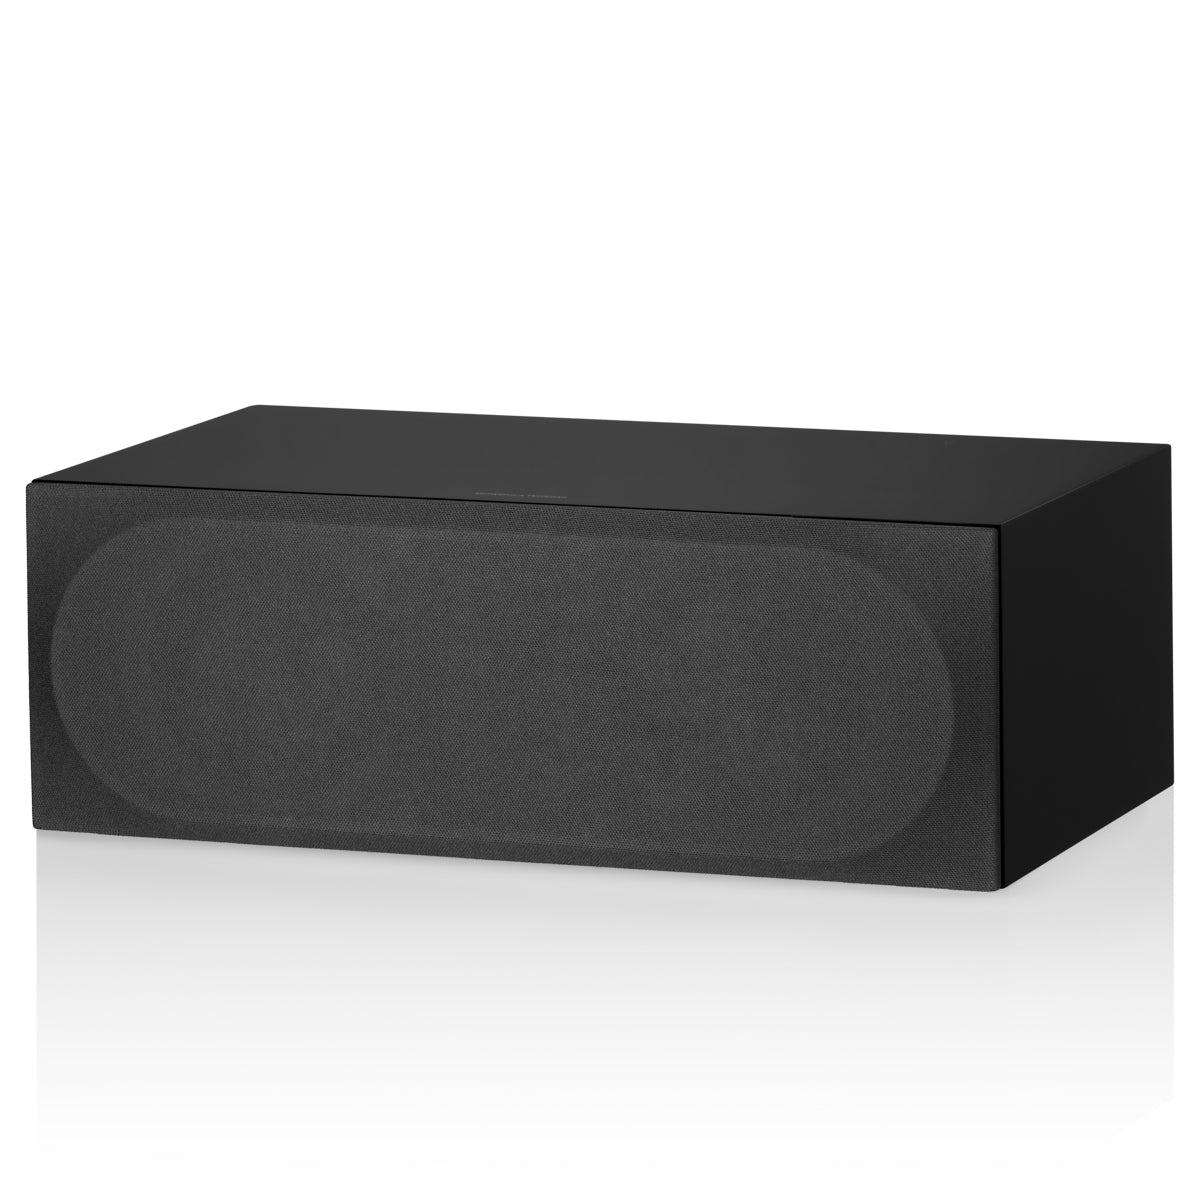 Bowers & Wilkins HTM72 S3 2-Way Centre-Channel Speaker - Black - The Audio Experts